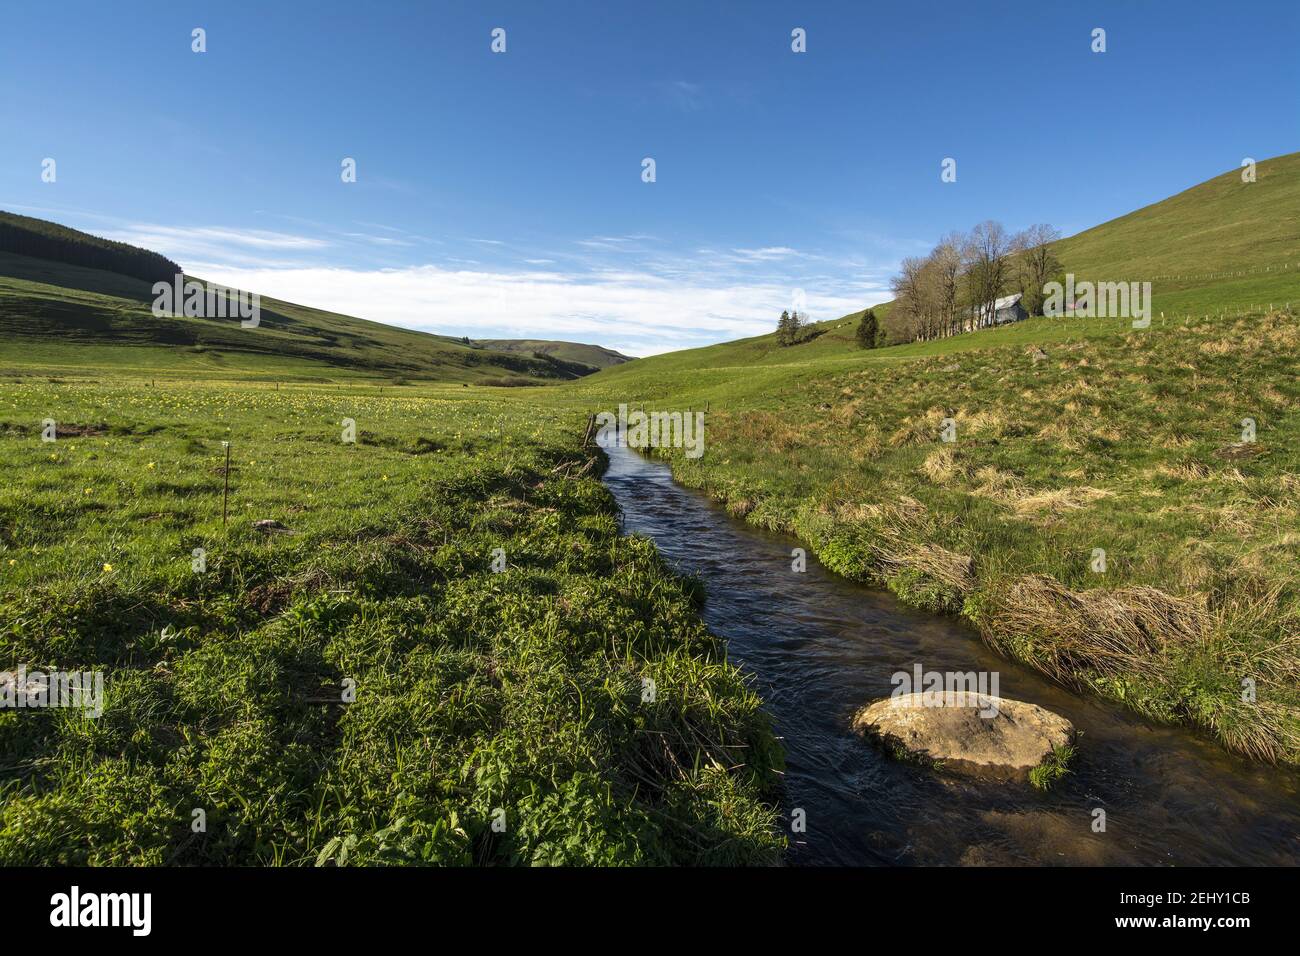 Beautiful valley of Jassy, Cezallier, in Puy de Dome, Auvergne-Rhone-Alpes, France Stock Photo